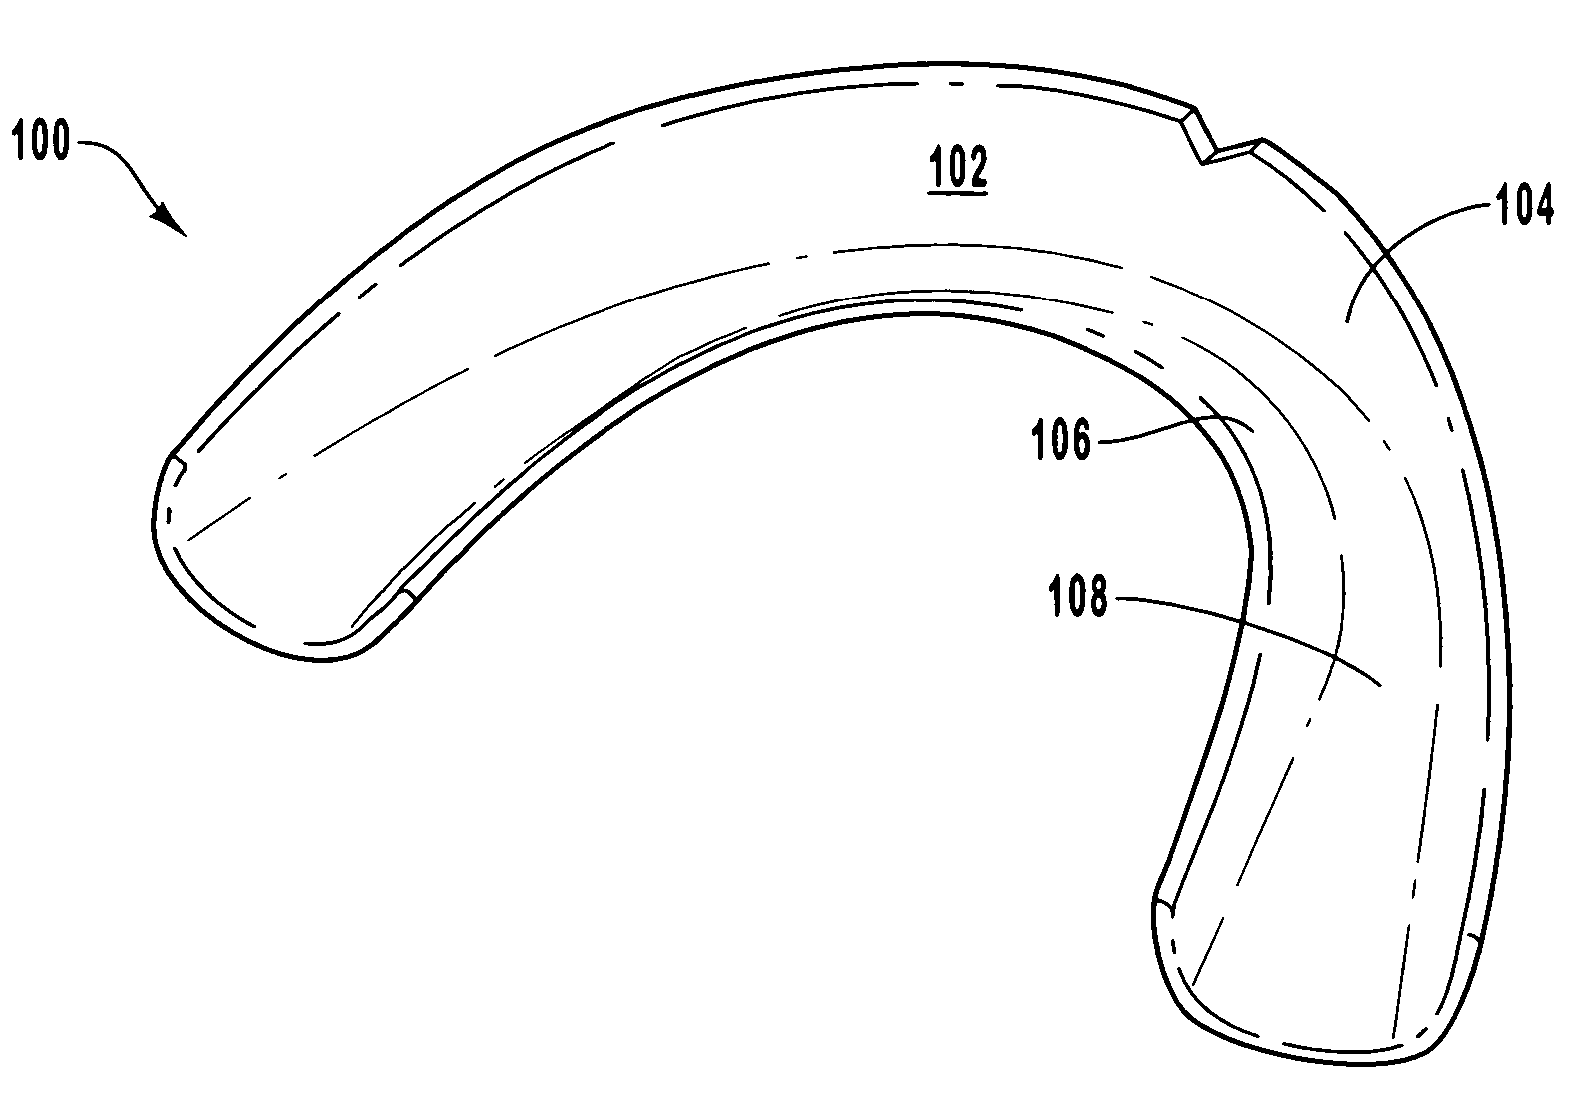 Dental treatment tray comprising a plasticized resin for improved moldability and conformability